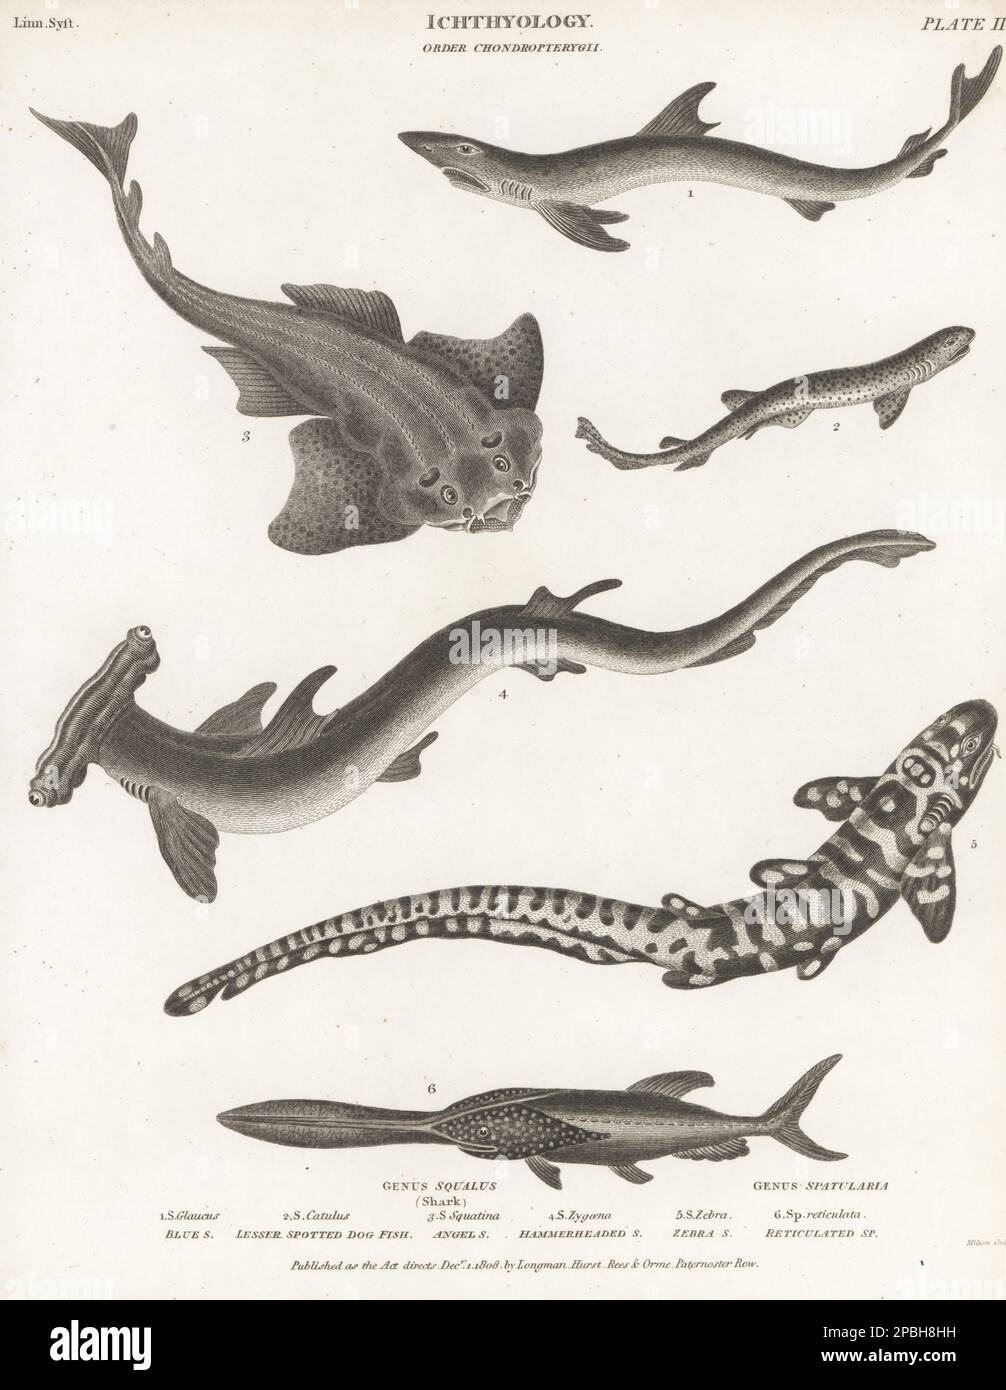 Blue dog shark, Prionace glauca 1, dogfish, Scyliorhinus canicula 2, critically endangered angelshark, Squatina squatina 3, smooth hammerhead, Sphyrna zygaena 4, zebra shark, Stegostoma fasciatum 5 and American paddlefish, Polyodon spathula 6. Copperplate engraving by Thomas Milton from Abraham Rees' Cyclopedia or Universal Dictionary of Arts, Sciences and Literature, Longman, Hurst, Rees, Orme, Paternoster Row, London, December 1, 1808. Stock Photo